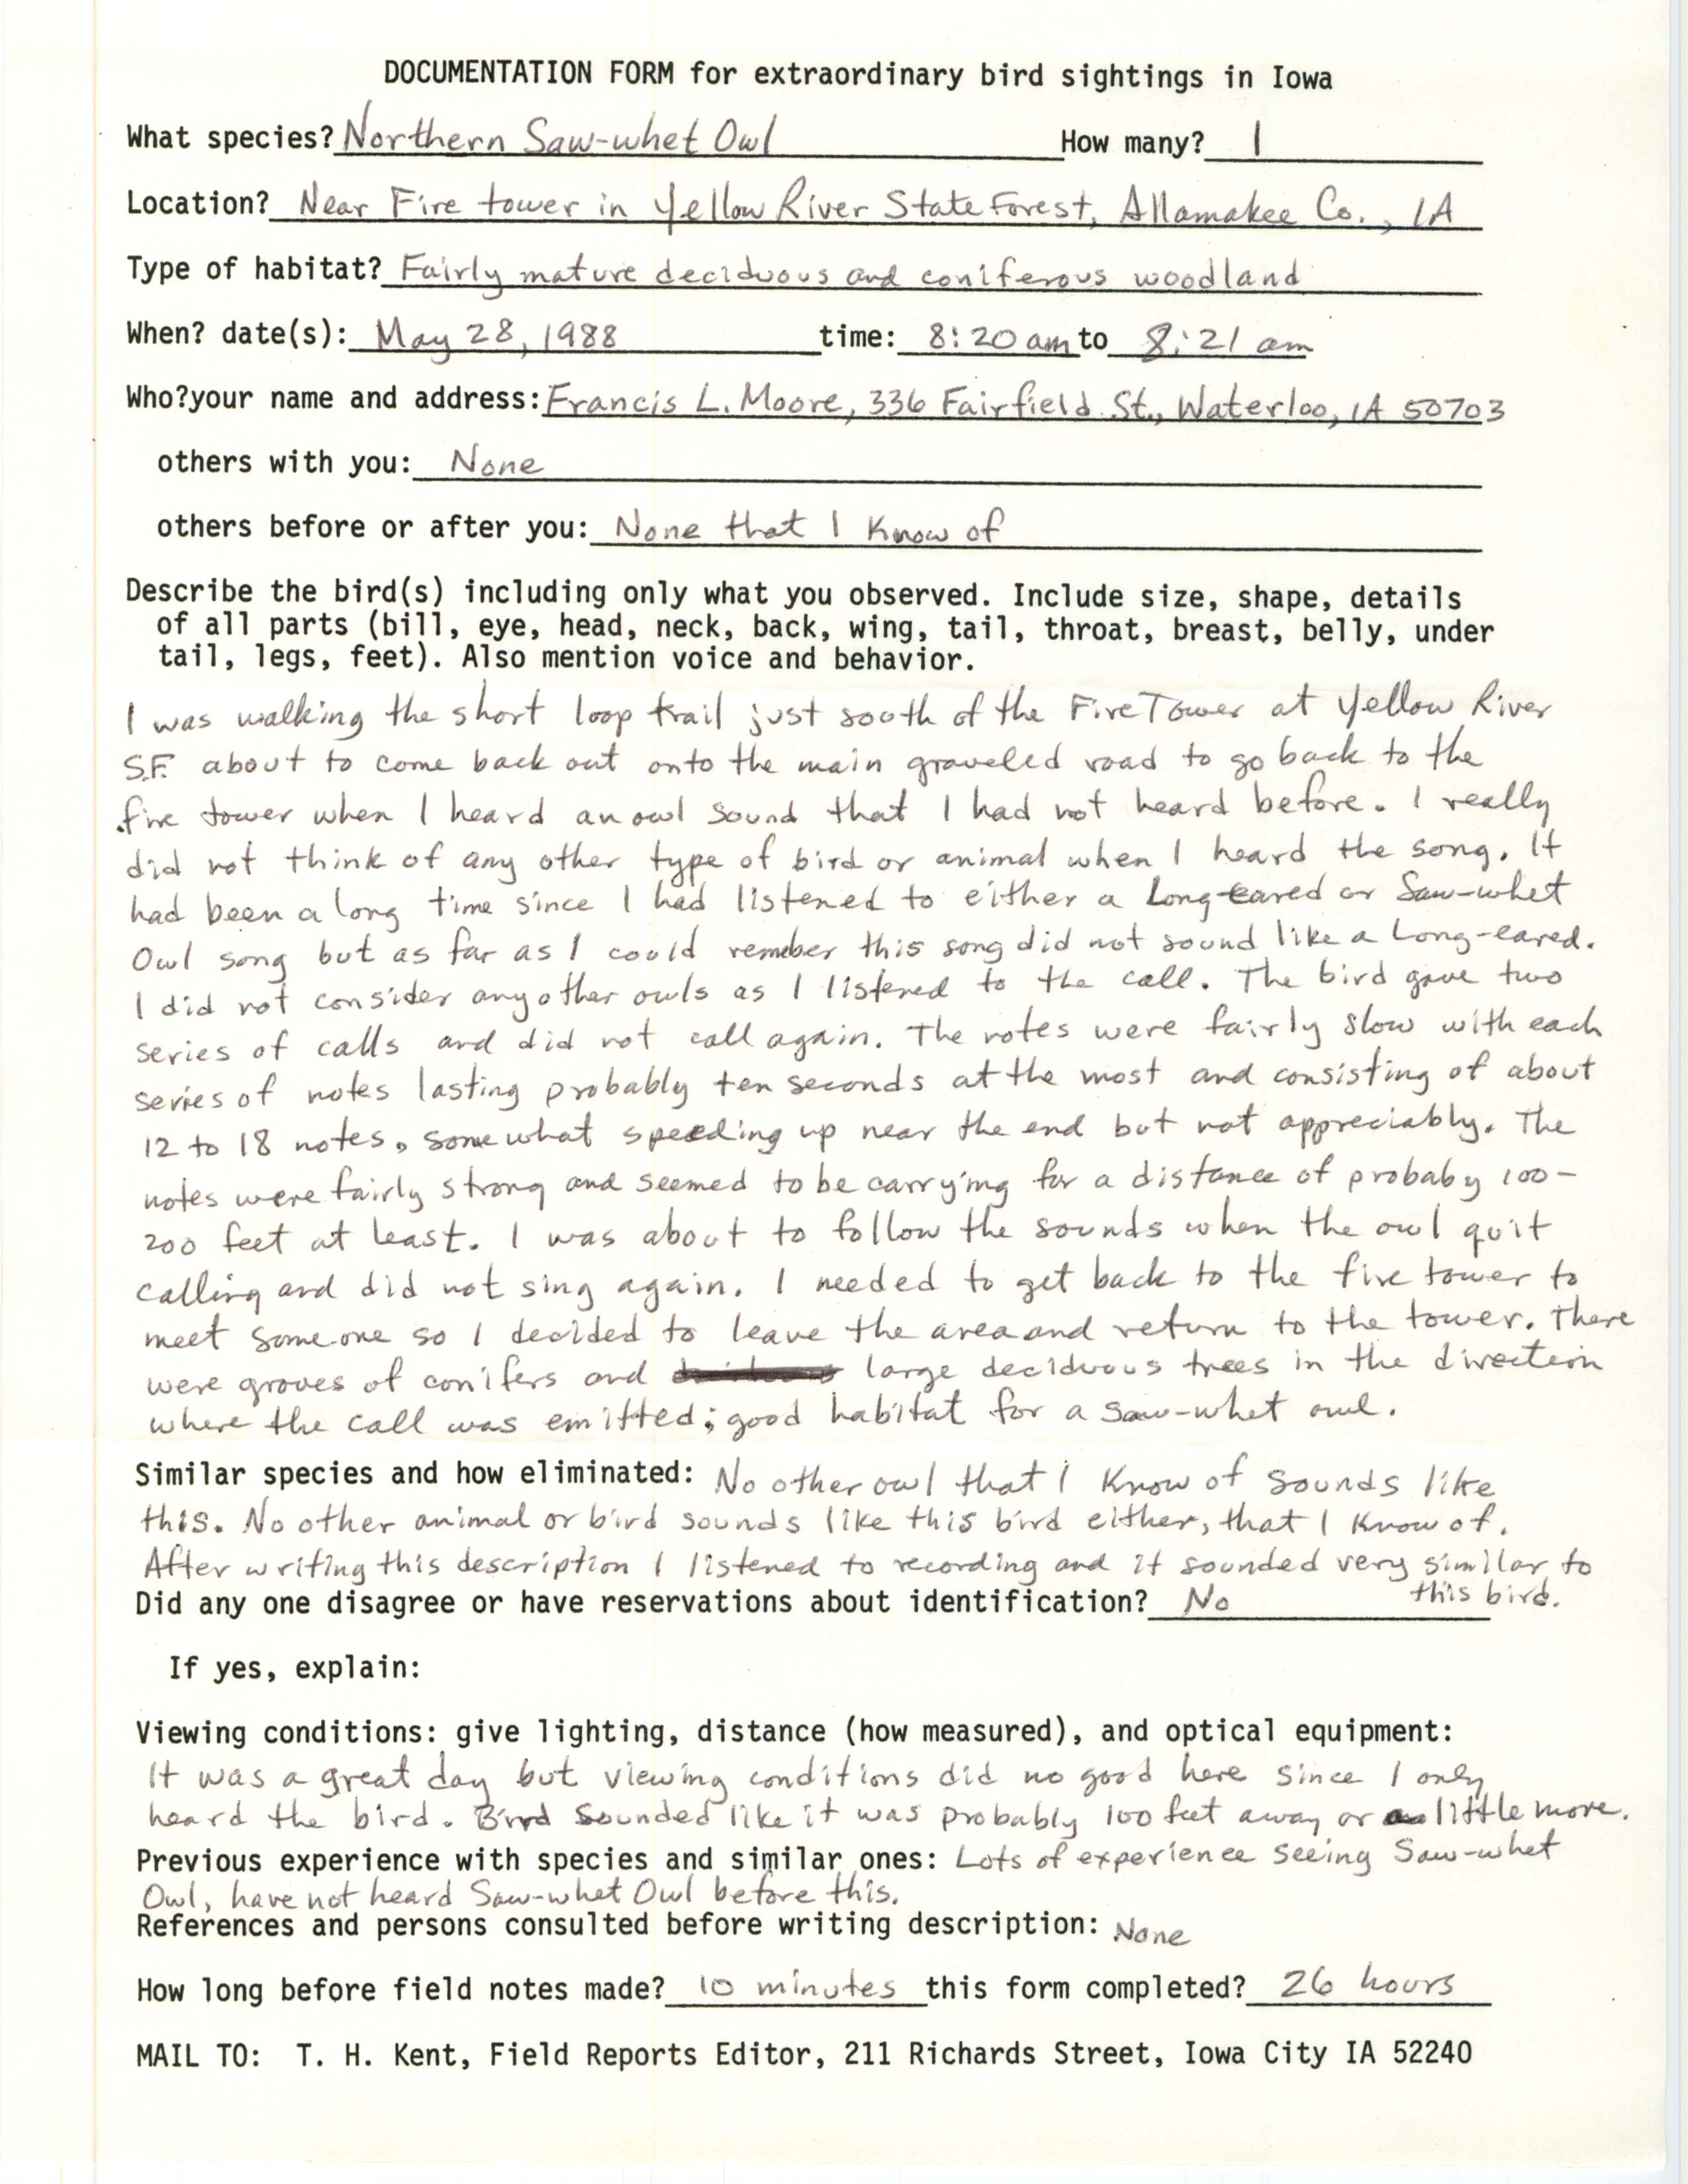 Rare bird documentation form for Northern Saw-whet Owl at Yellow River State Forest, 1988